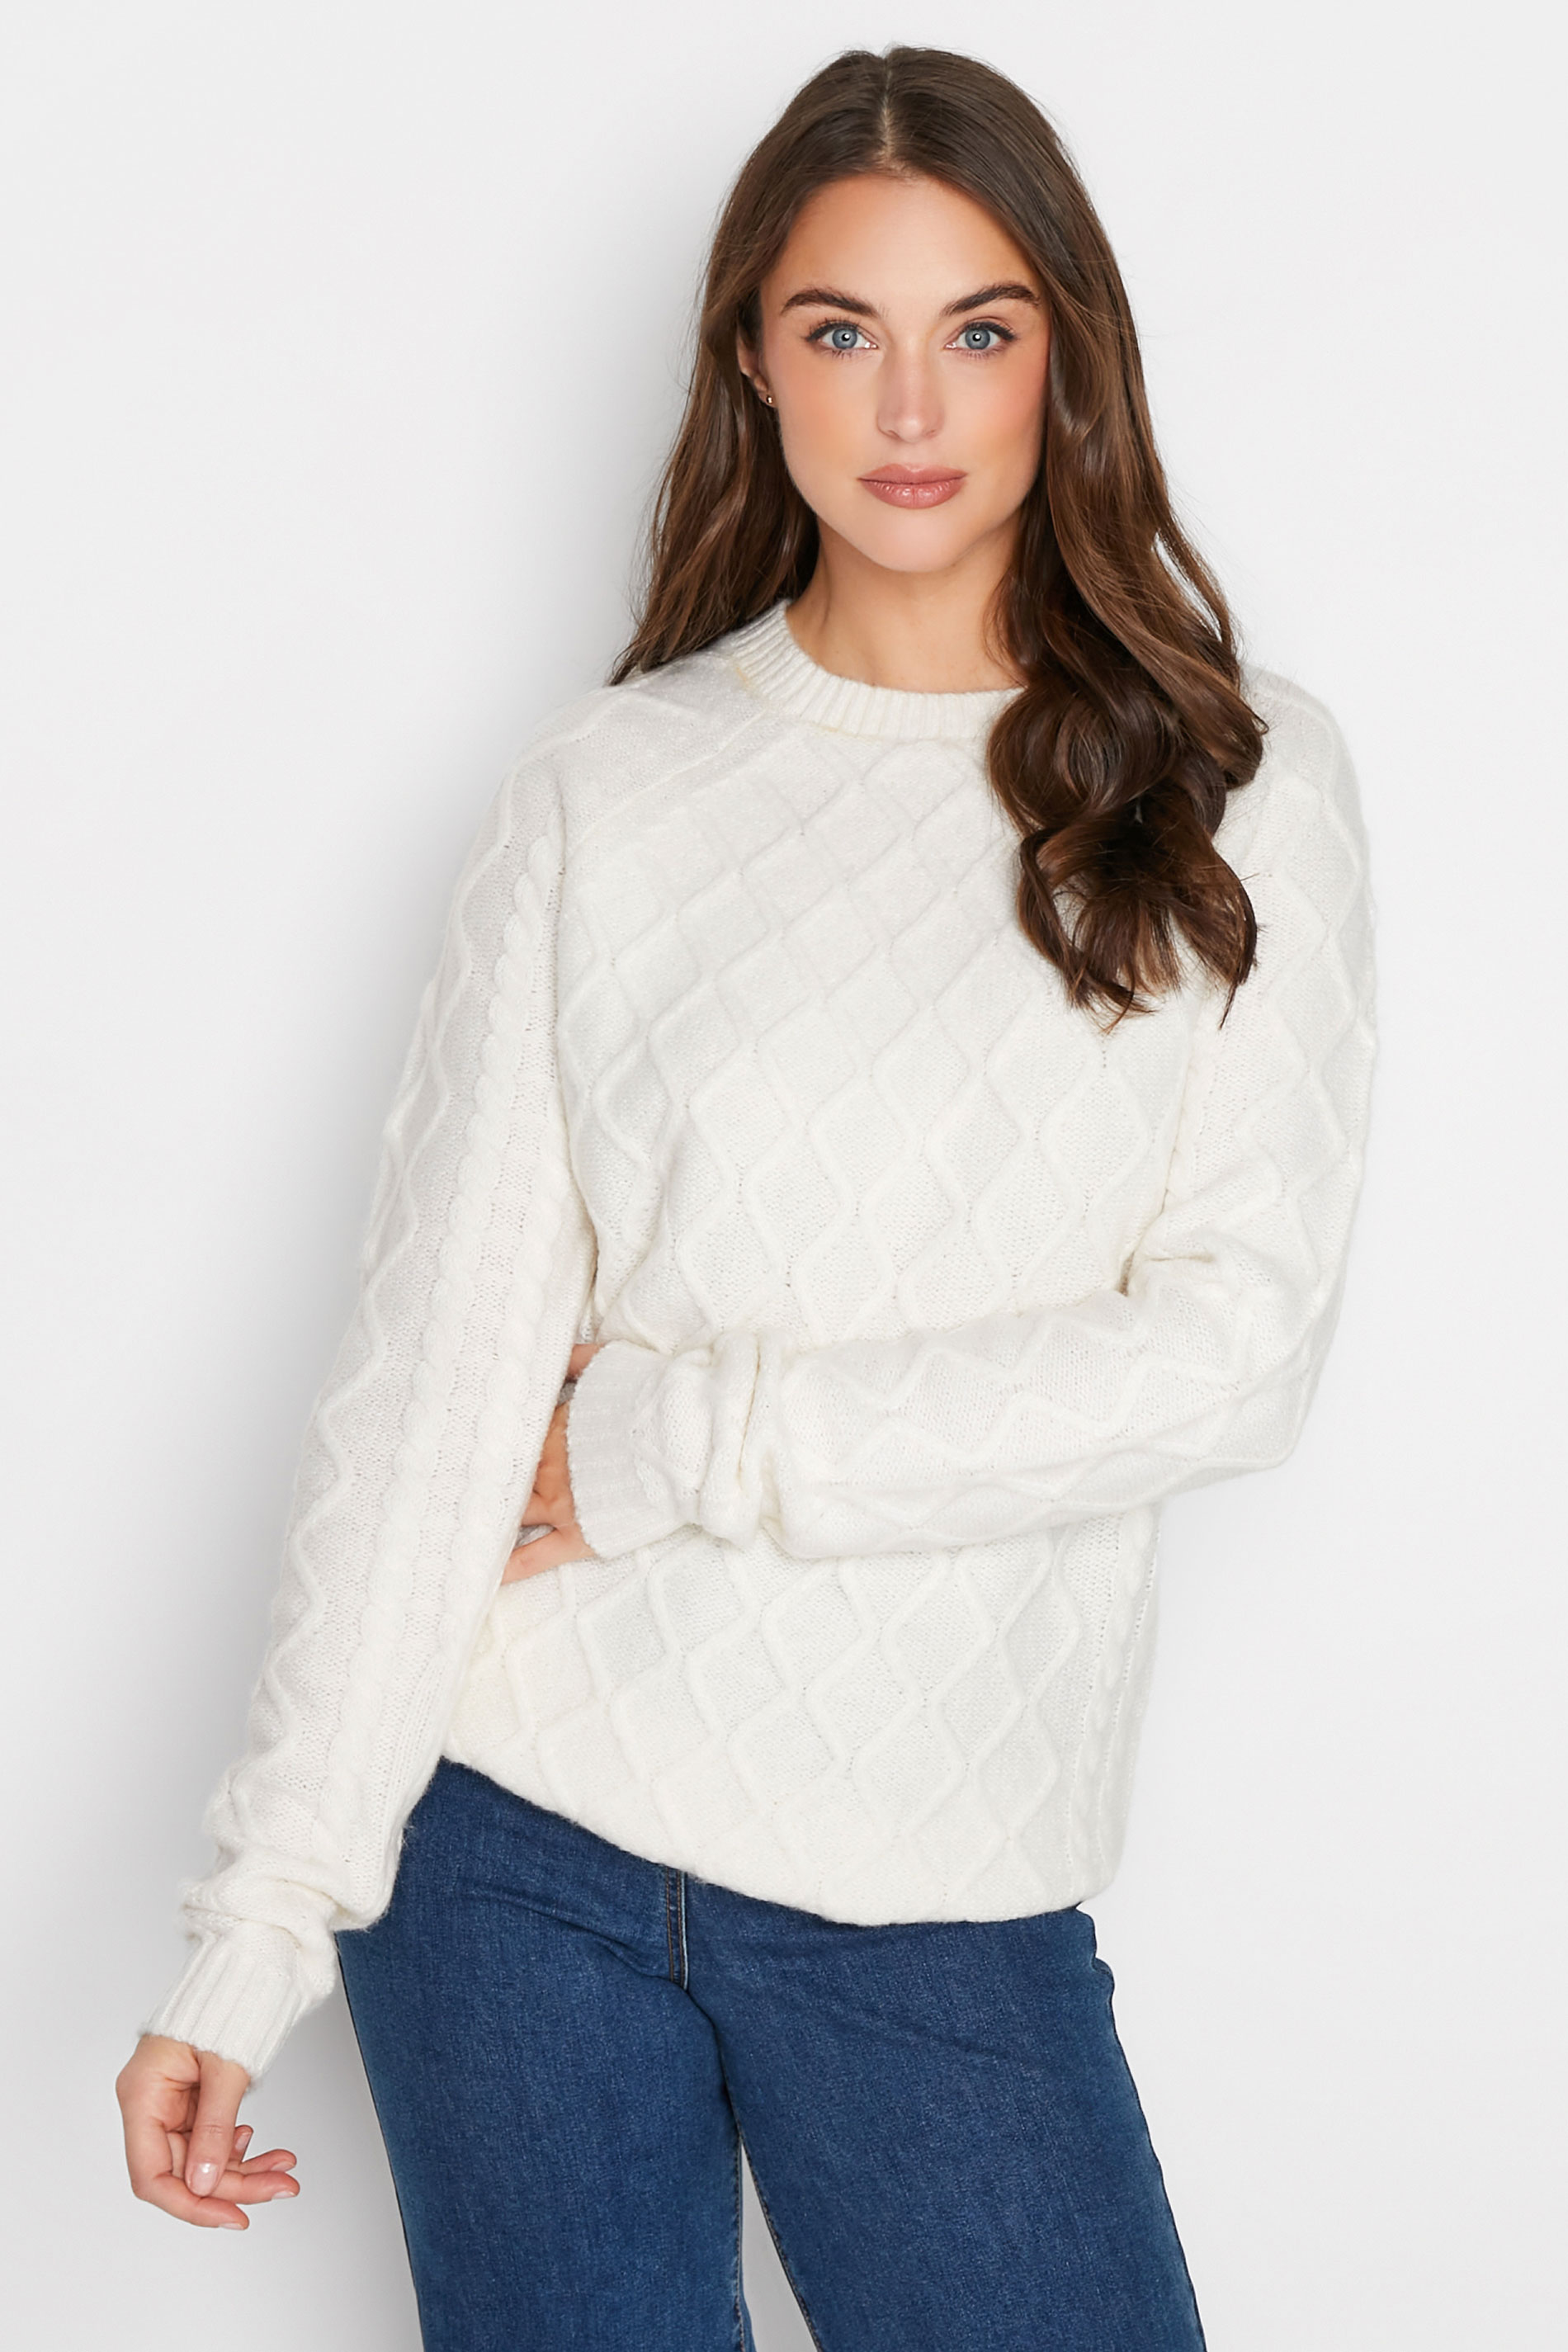 LTS Tall Women's White Cable Knit Jumper | Long Tall Sally  1